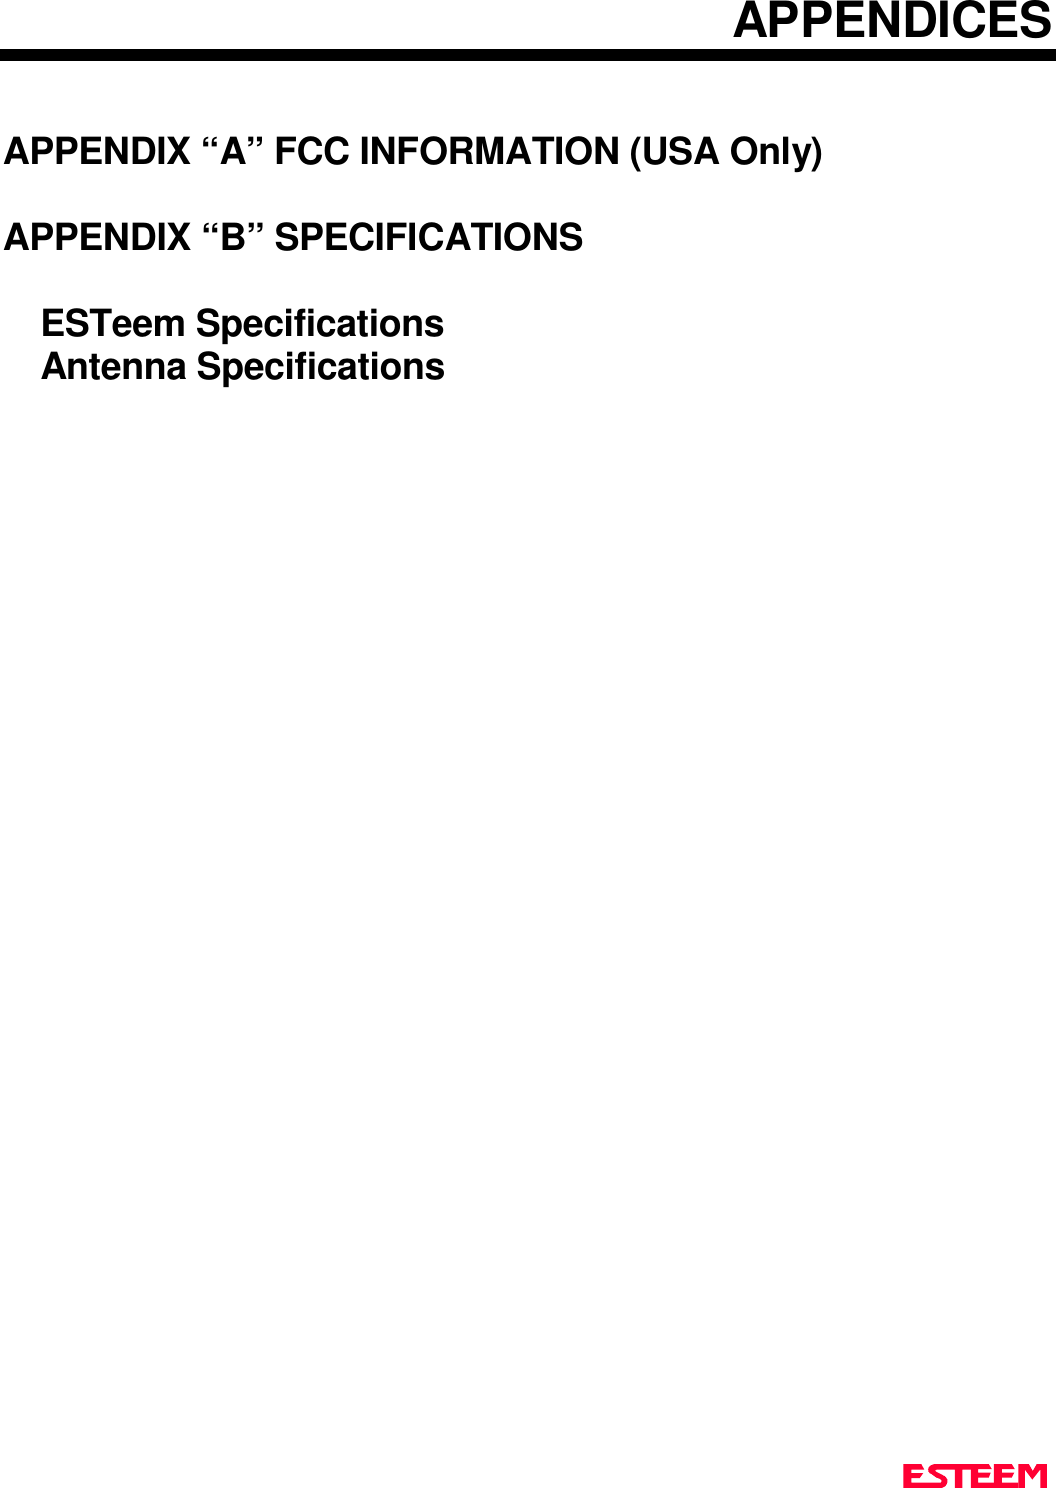 APPENDICESAPPENDIX “A” FCC INFORMATION (USA Only)APPENDIX “B” SPECIFICATIONSESTeem SpecificationsAntenna Specifications